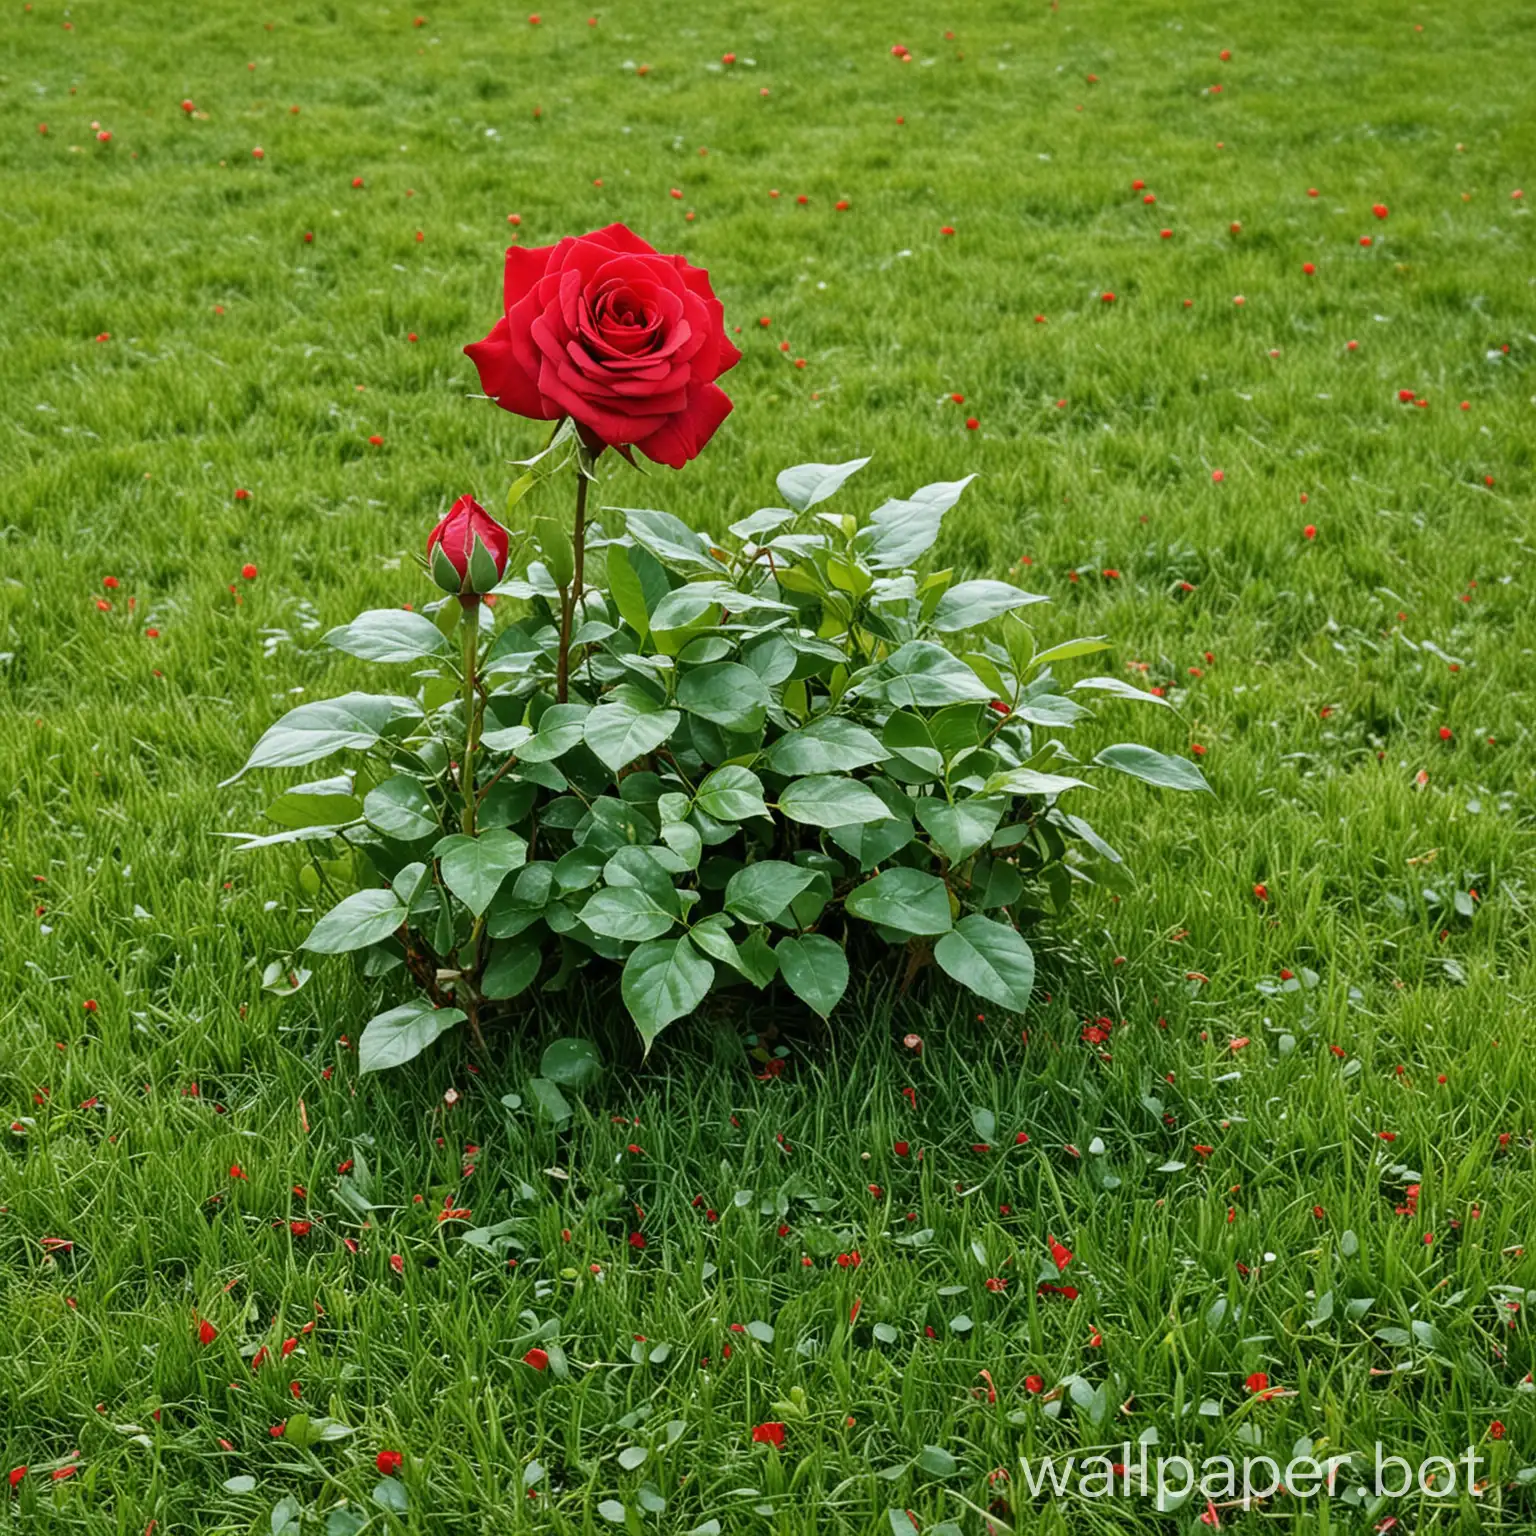 Lush-Green-Grass-with-Vibrant-Red-Rose-Plant